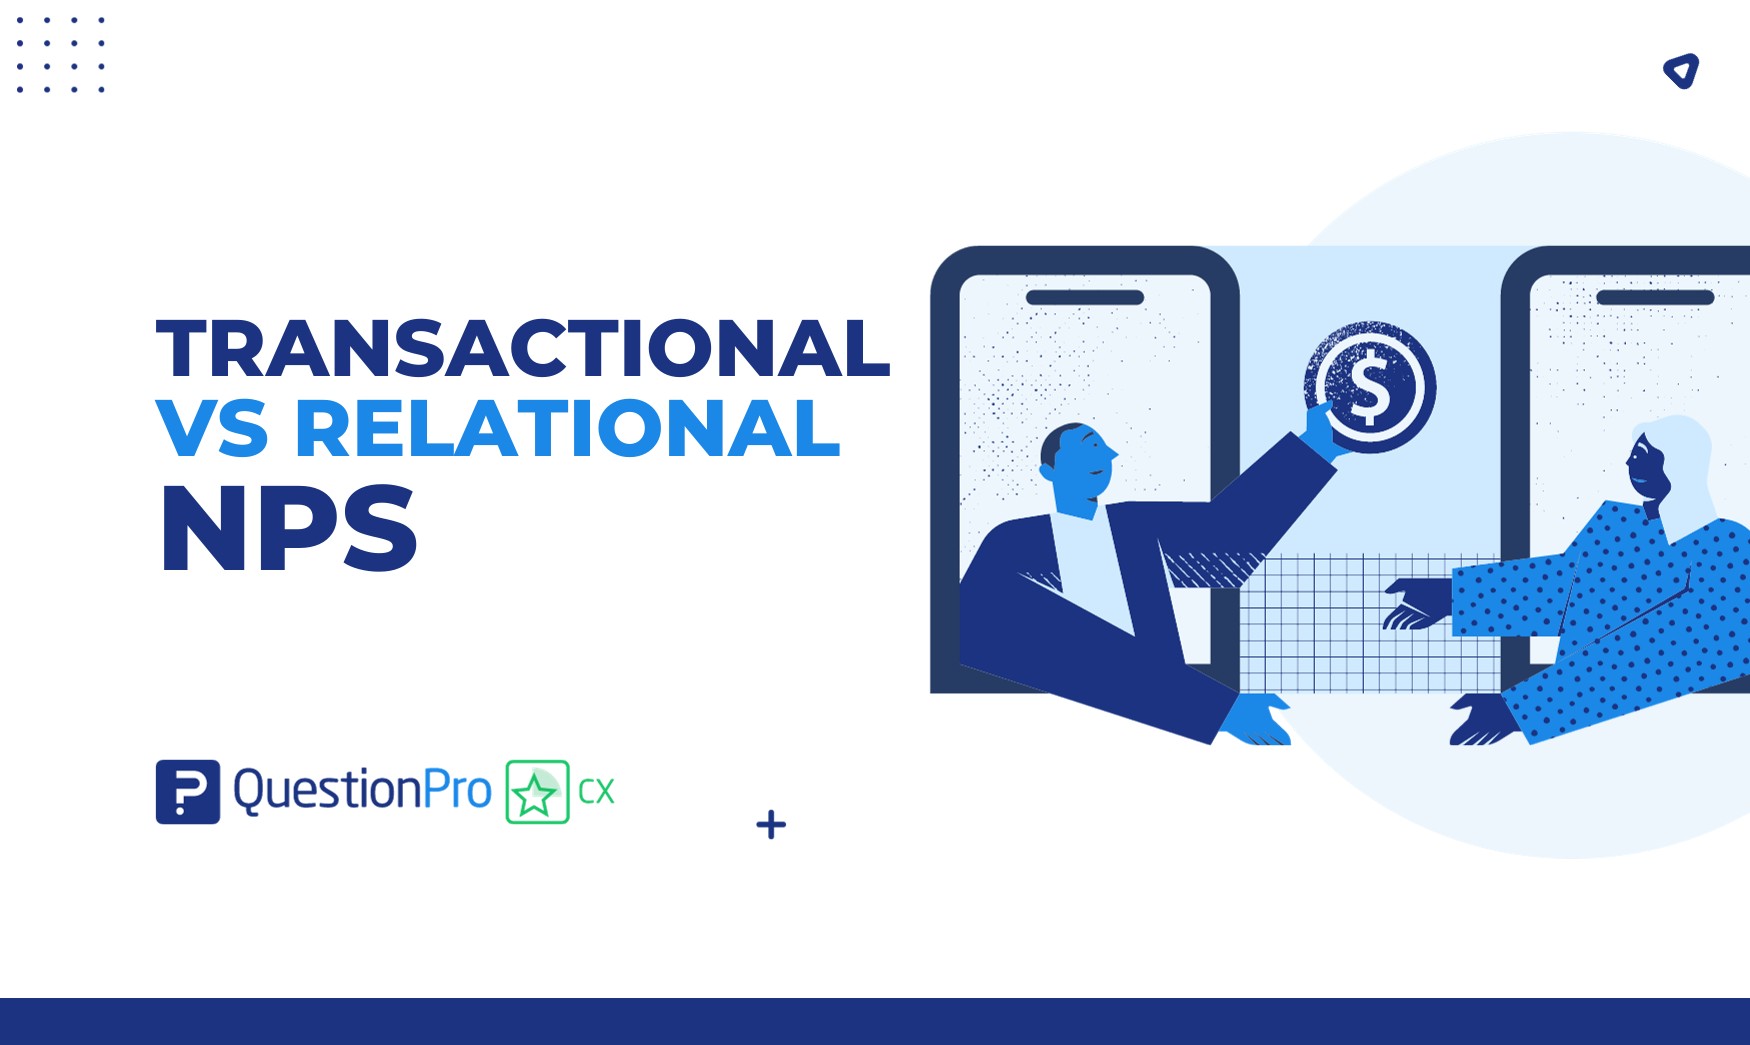 Explore the differences and uncover insights between transactional vs relational NPS. Enhance the strategies for your business.